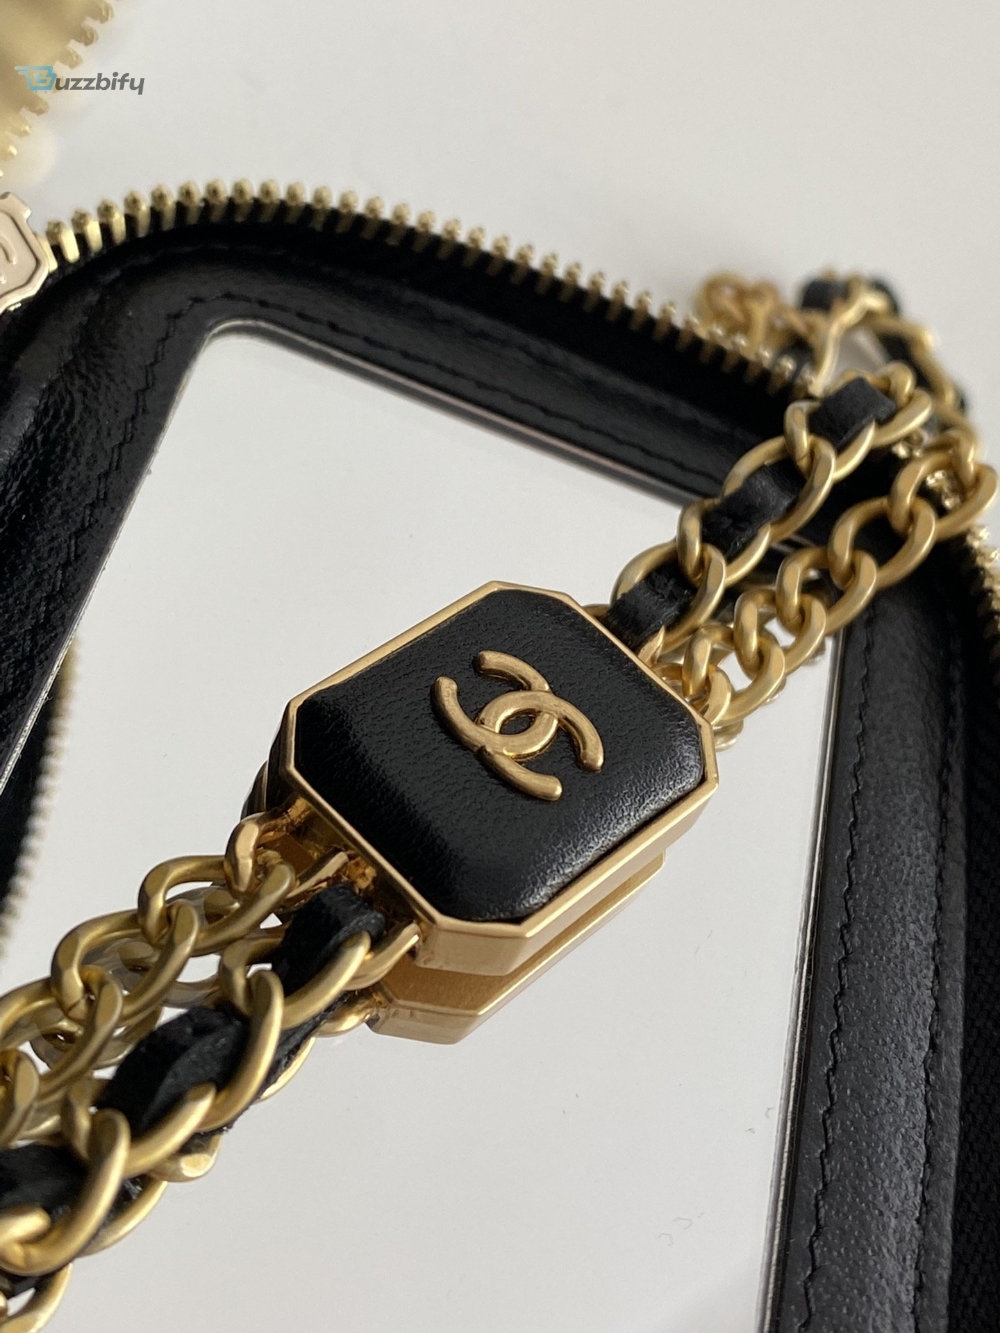 Chanel Small Vanity With Chain Black For Women Womens Bags 4.3In11cm